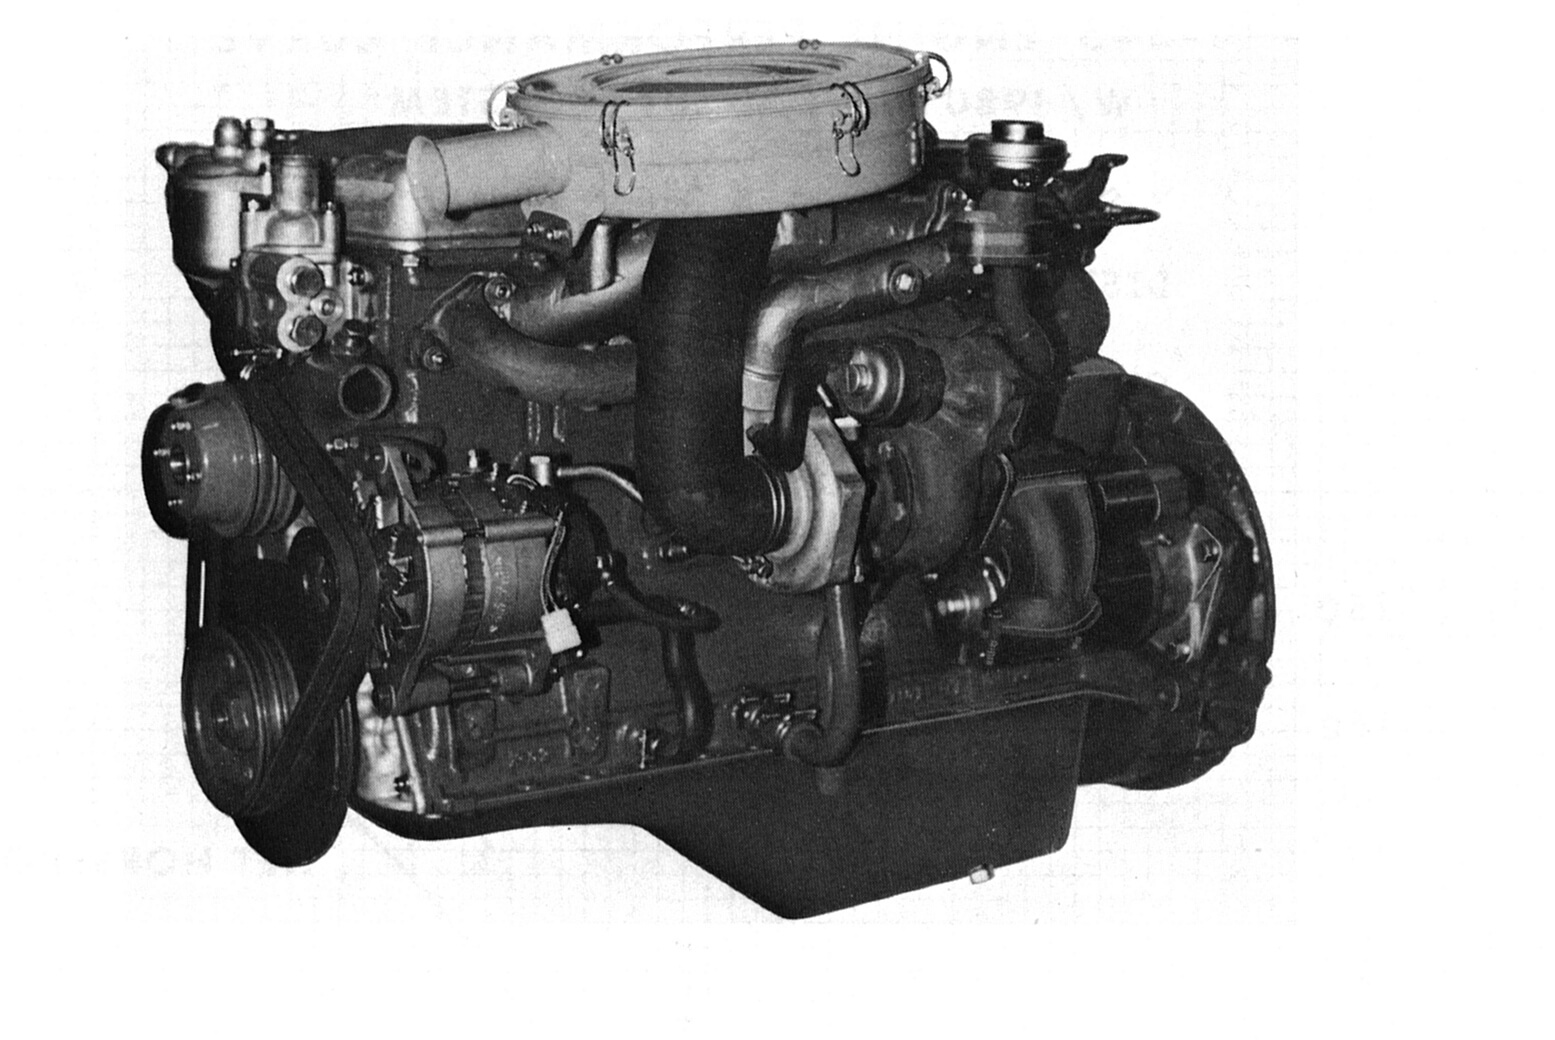 SPECIFICATIONS: SD-33T DISPLACEMENT: 198 cid (3,246 cc) BORE & STROKE: 3.27x3.94 in. POWER: 101 hp @ 3,800 rpm TORQUE: 175 lb-ft @ 2,200 rpm COMPRESSION RATIO: 20.8:1 MAX BOOST: 6.5 psi ENGINE WEIGHT: 676 lbs INJECTION PUMP: Diesel Kiki, CTS-2790 (Bosch License) INJECTOR OPENING: 1,607 psi